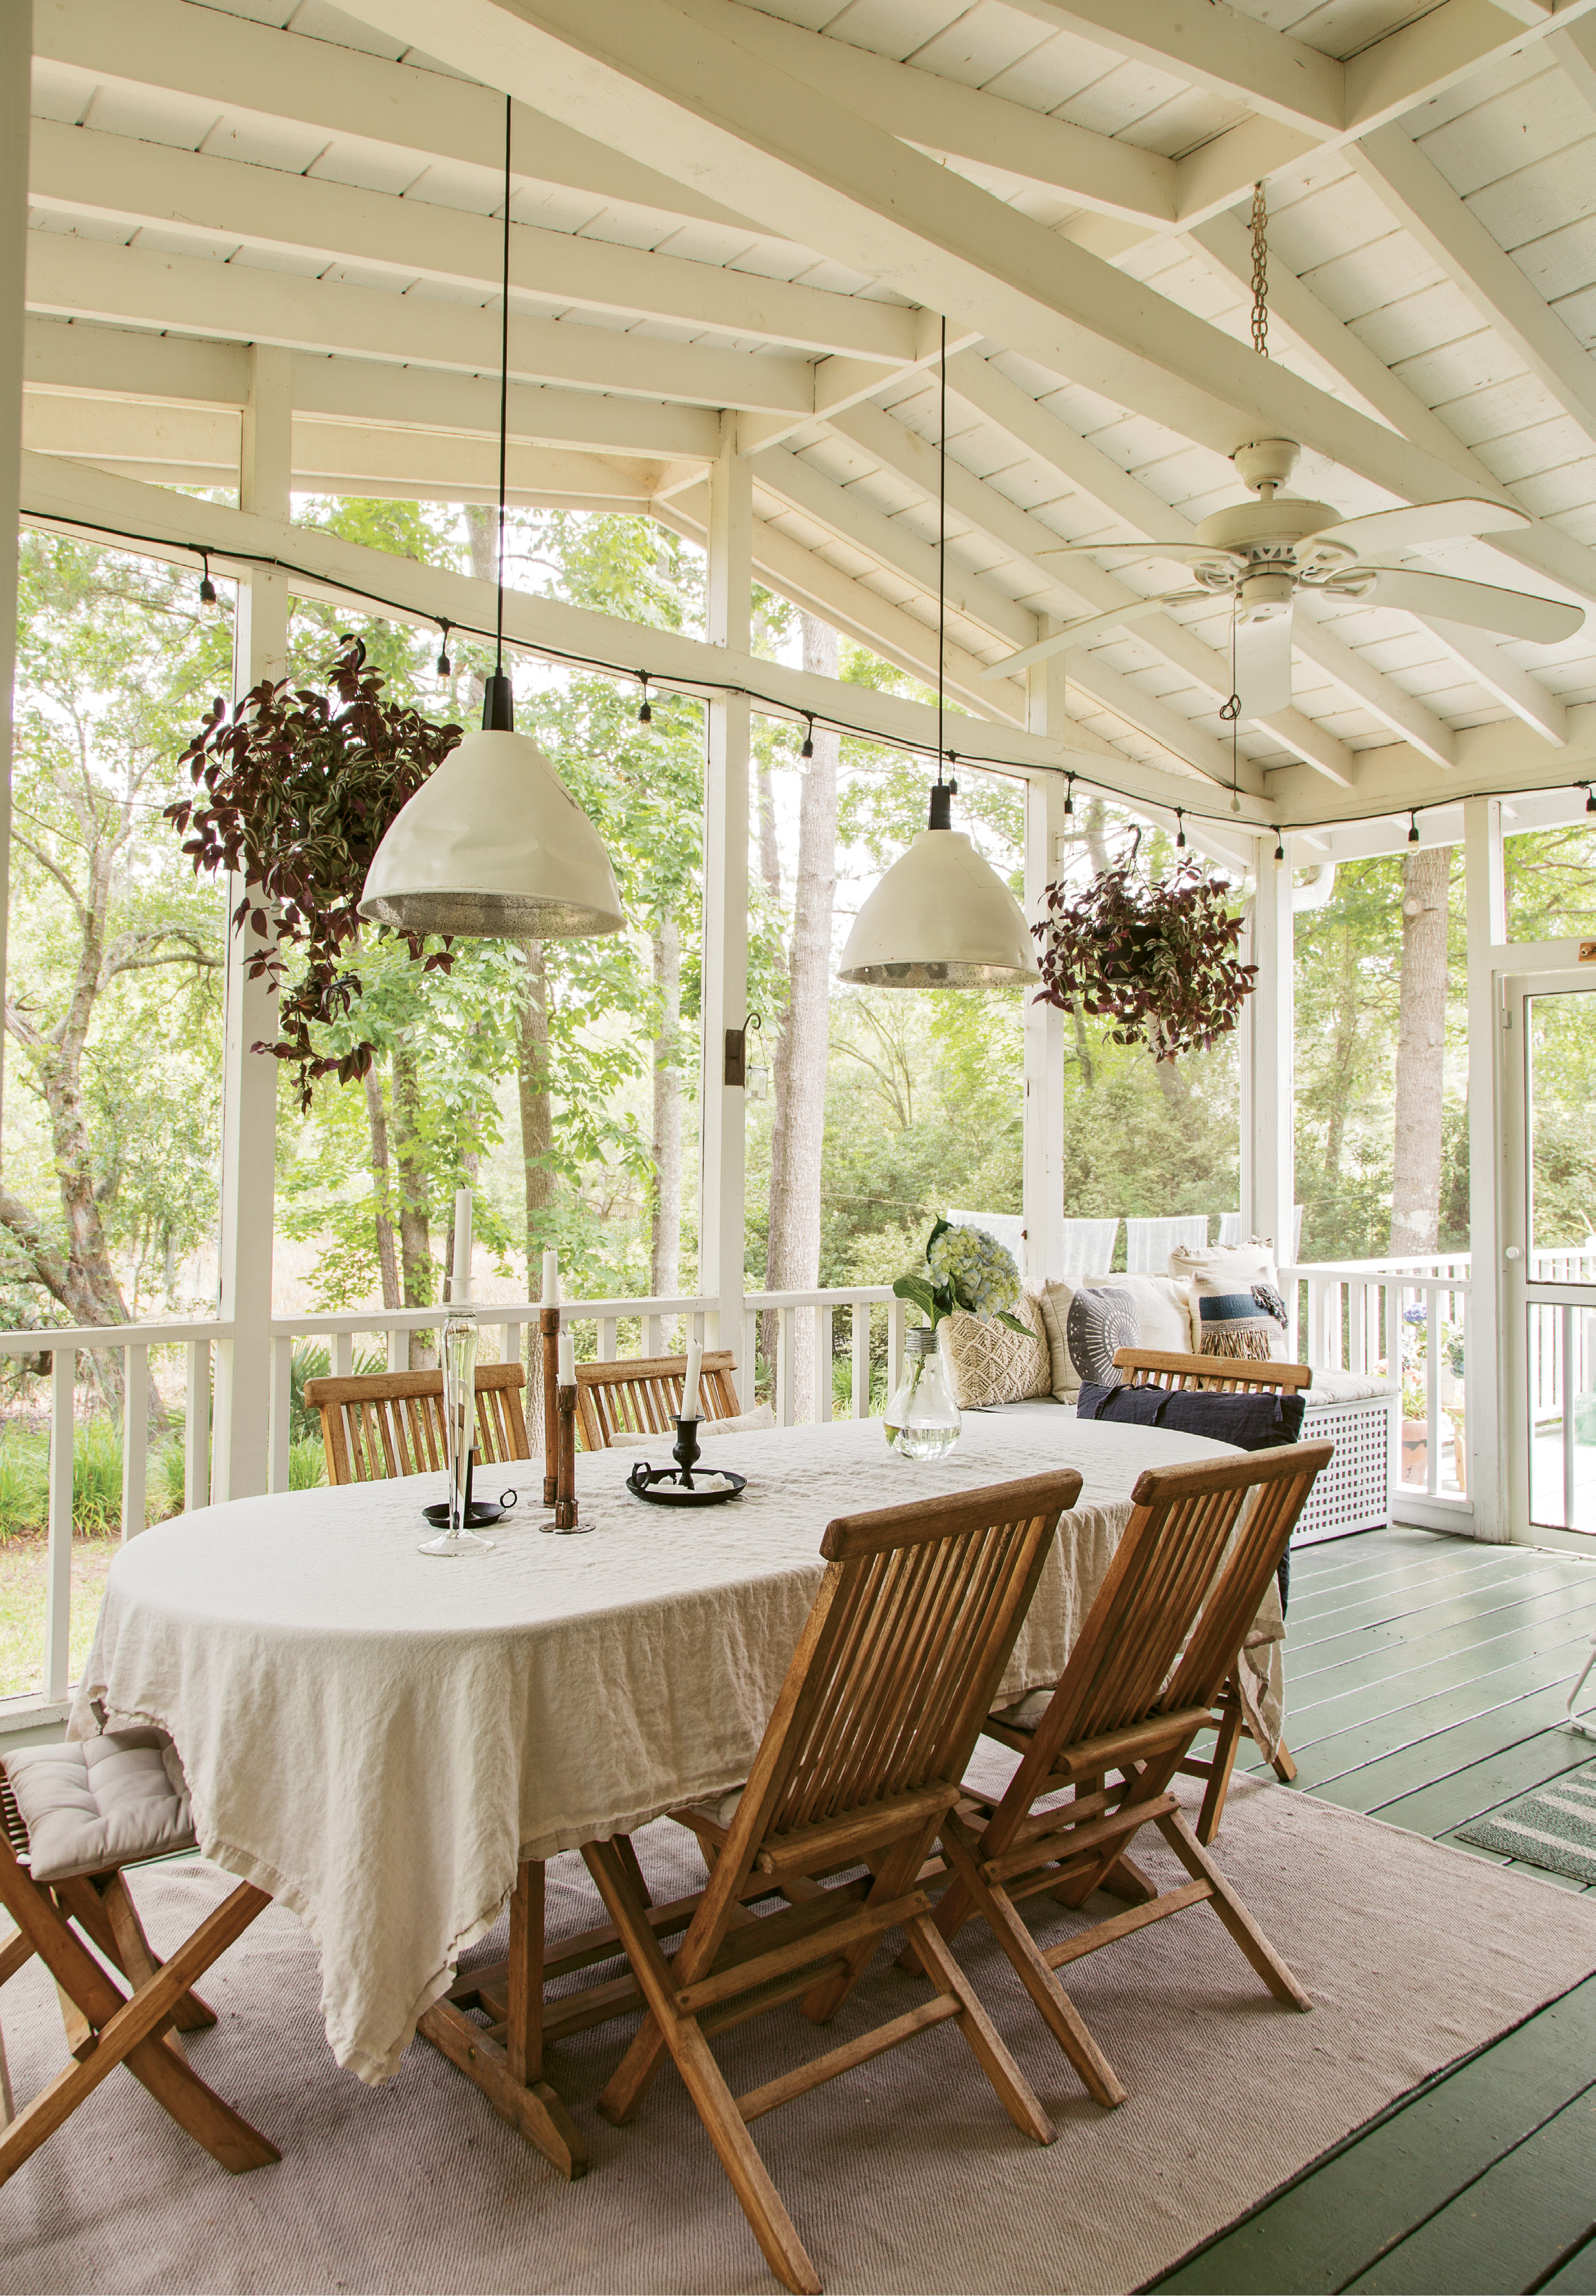 PORCH PARADISE: Winters in Gothenburg are harsh, so Therese and Jacob are loving the Lowcountry’s mild climate. Mature trees and a long creek view make dining alfresco particularly pleasant, as do rustic wooden chairs, simple white linens, and soft light from pendant lamps and candles.